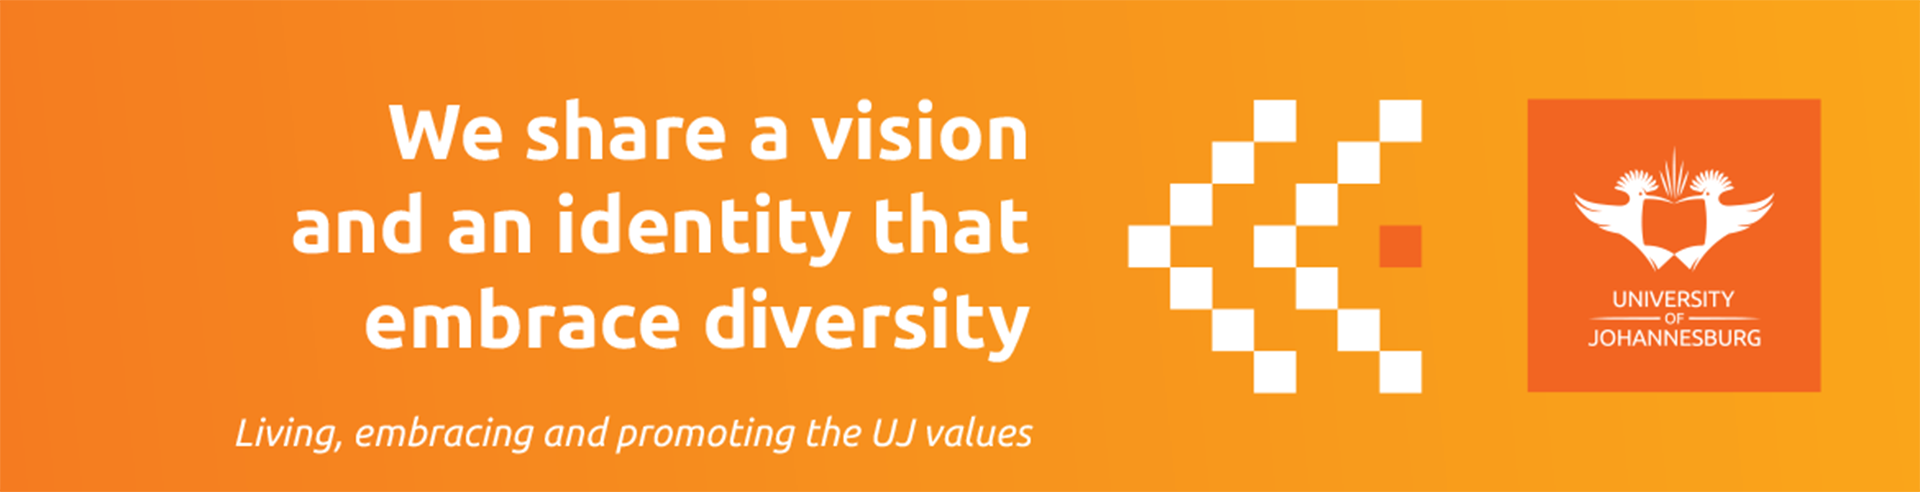 Uj Values Expressions Posters 2020 Ulink 1170x300mm 1